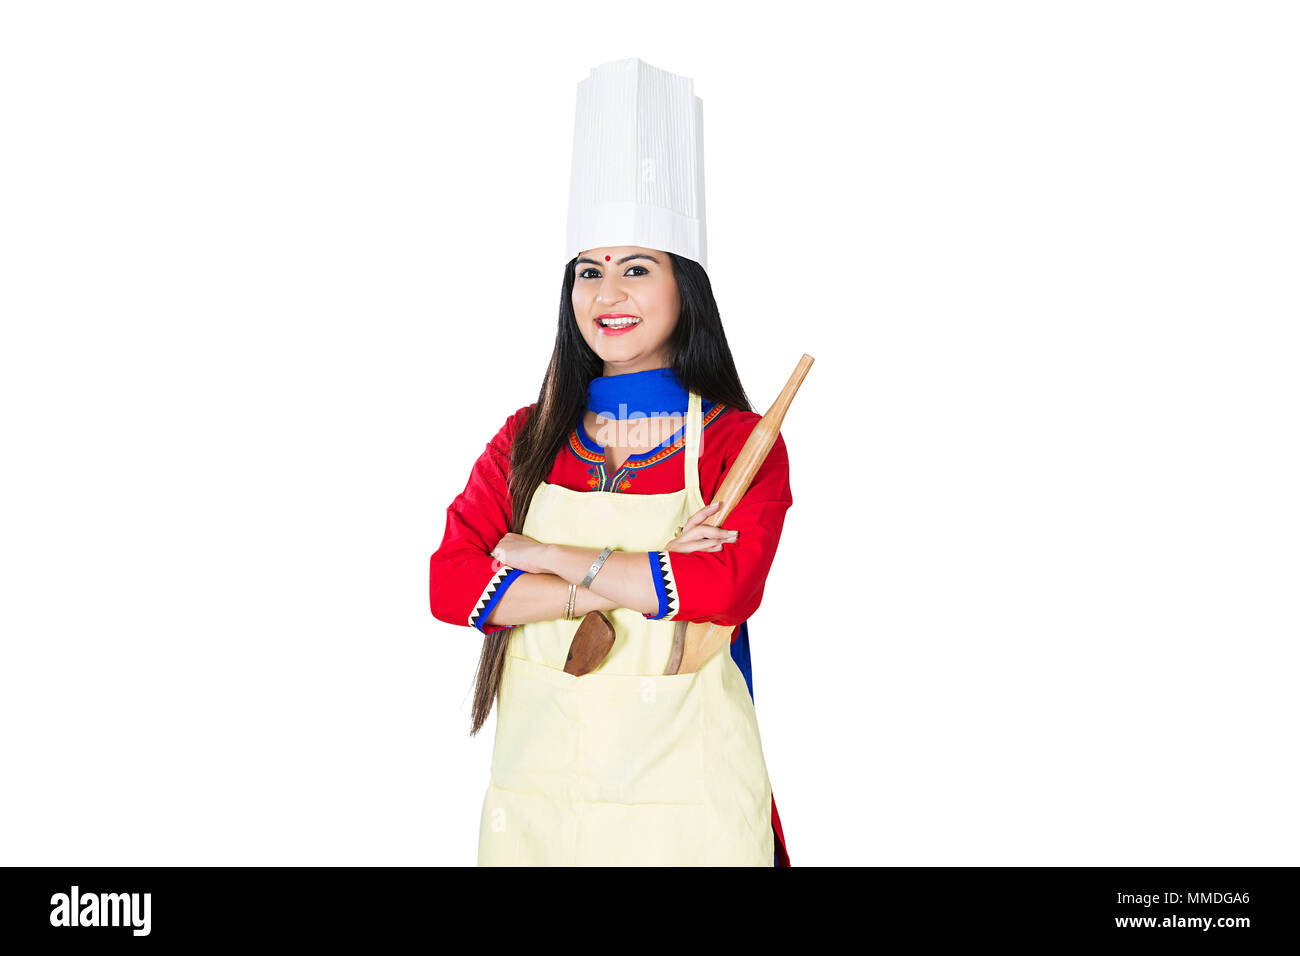 Smiling One Female Housewife Wearing Apron Holding rolling-pin Chef Hat Stock Photo